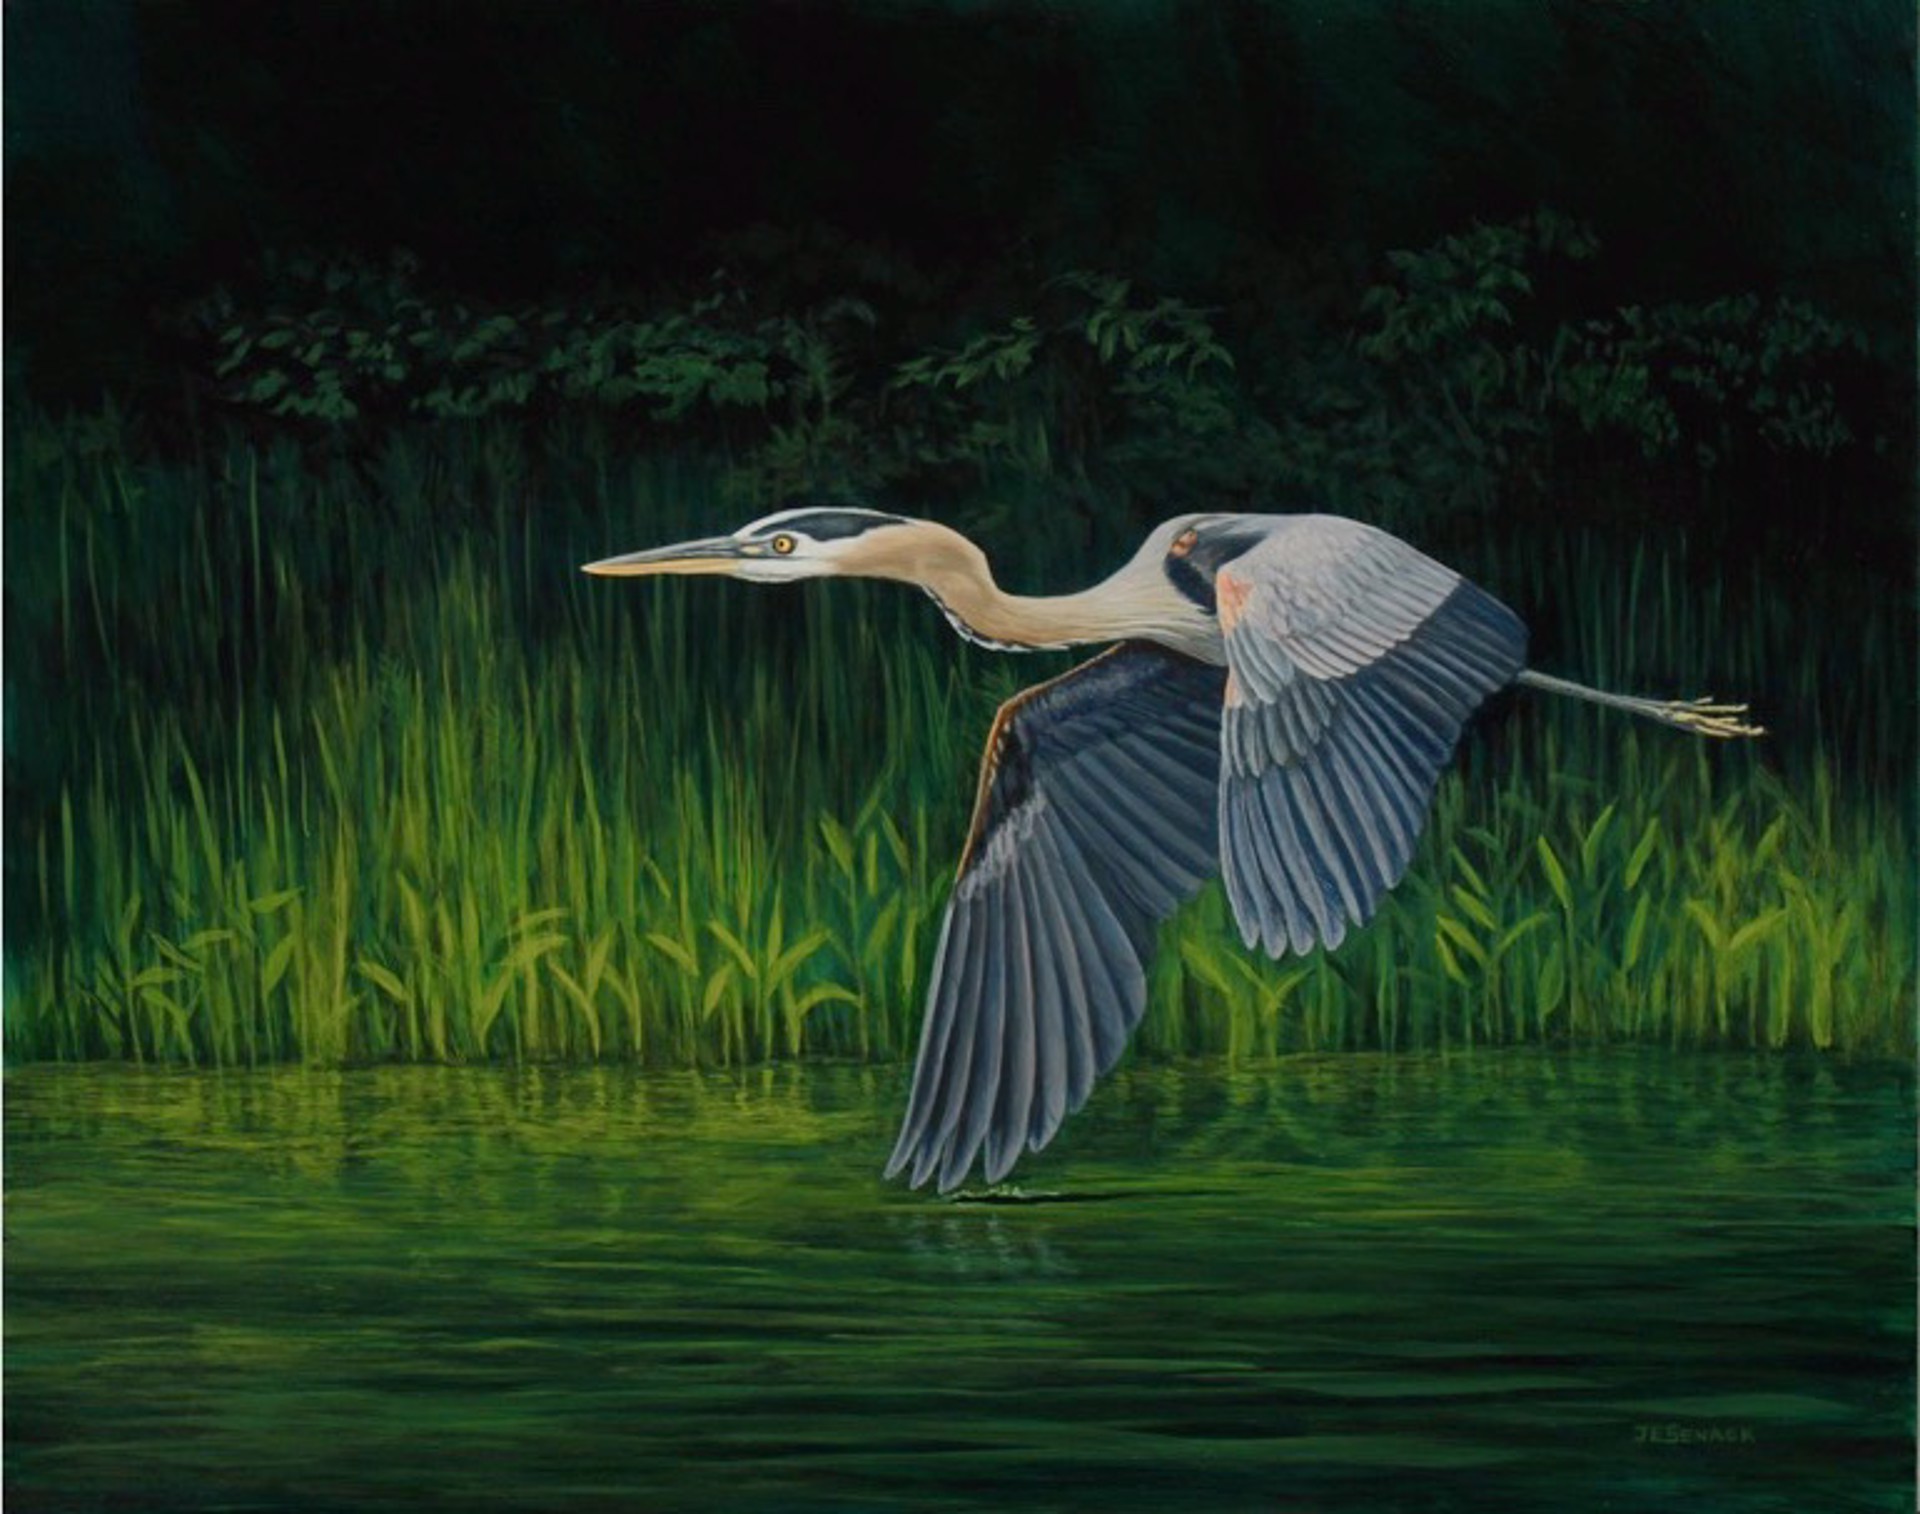 On the Wing (Great Blue Heron) by J.Elaine Senack